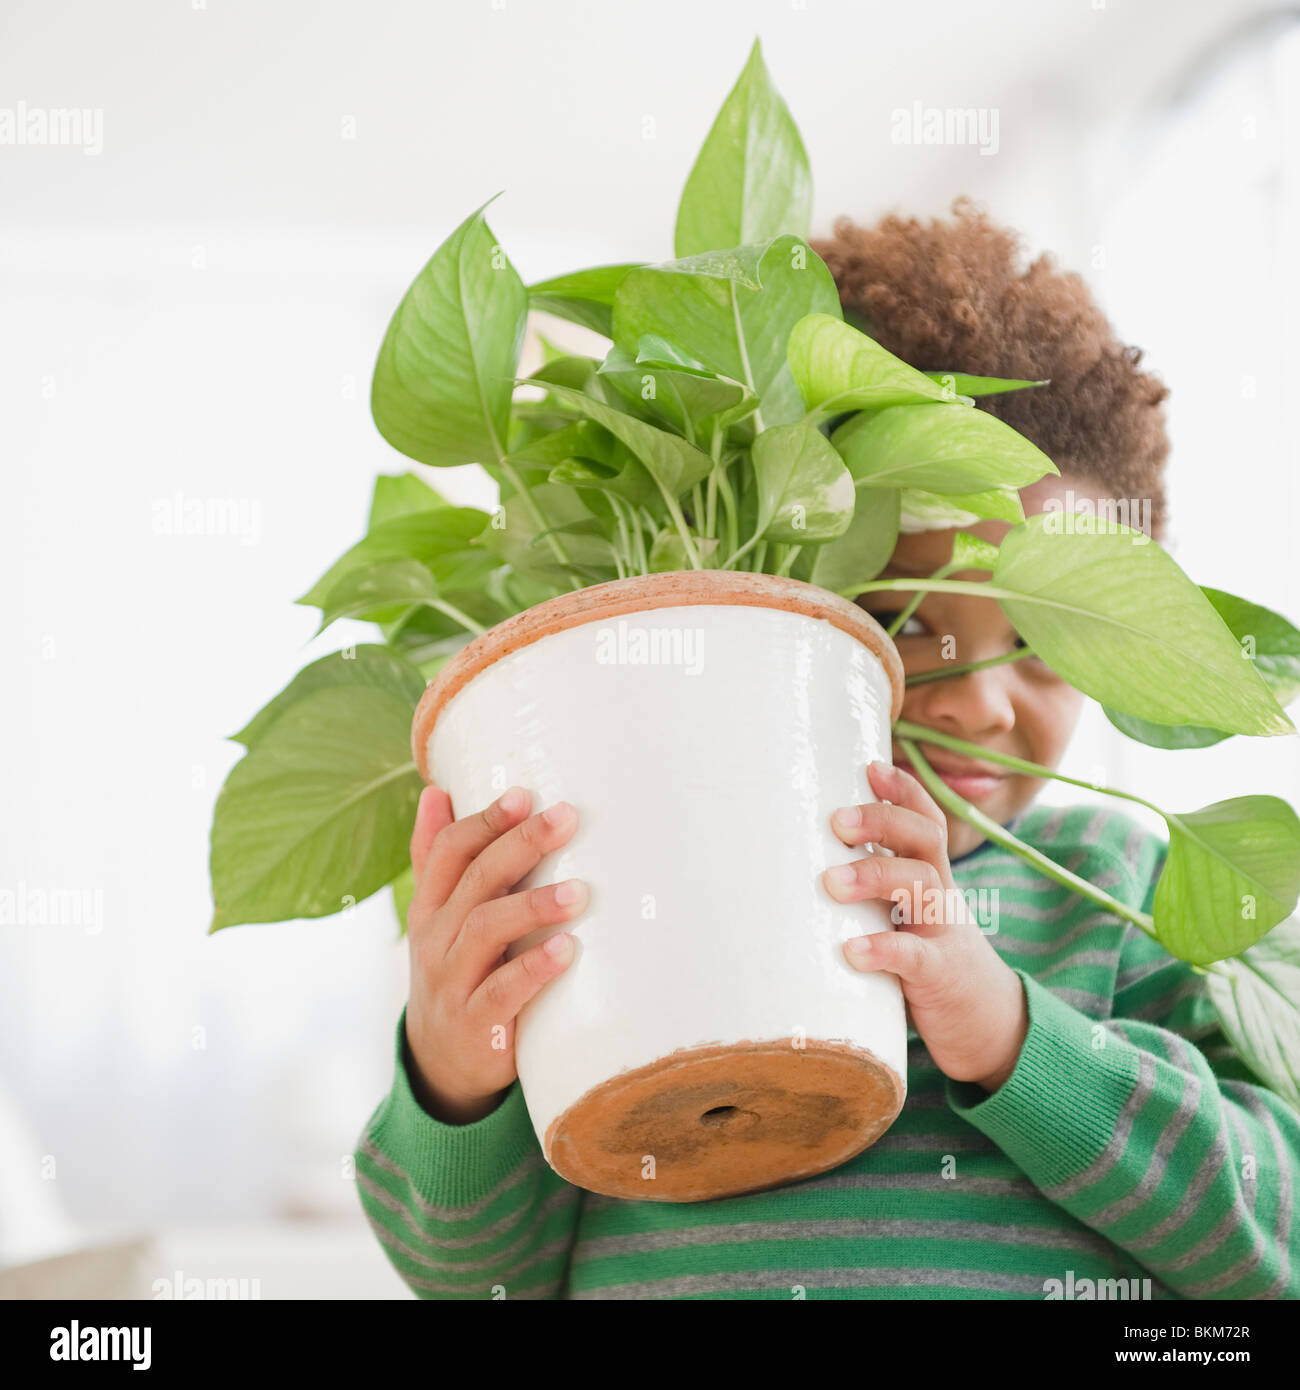 Black boy carrying potted plant Stock Photo